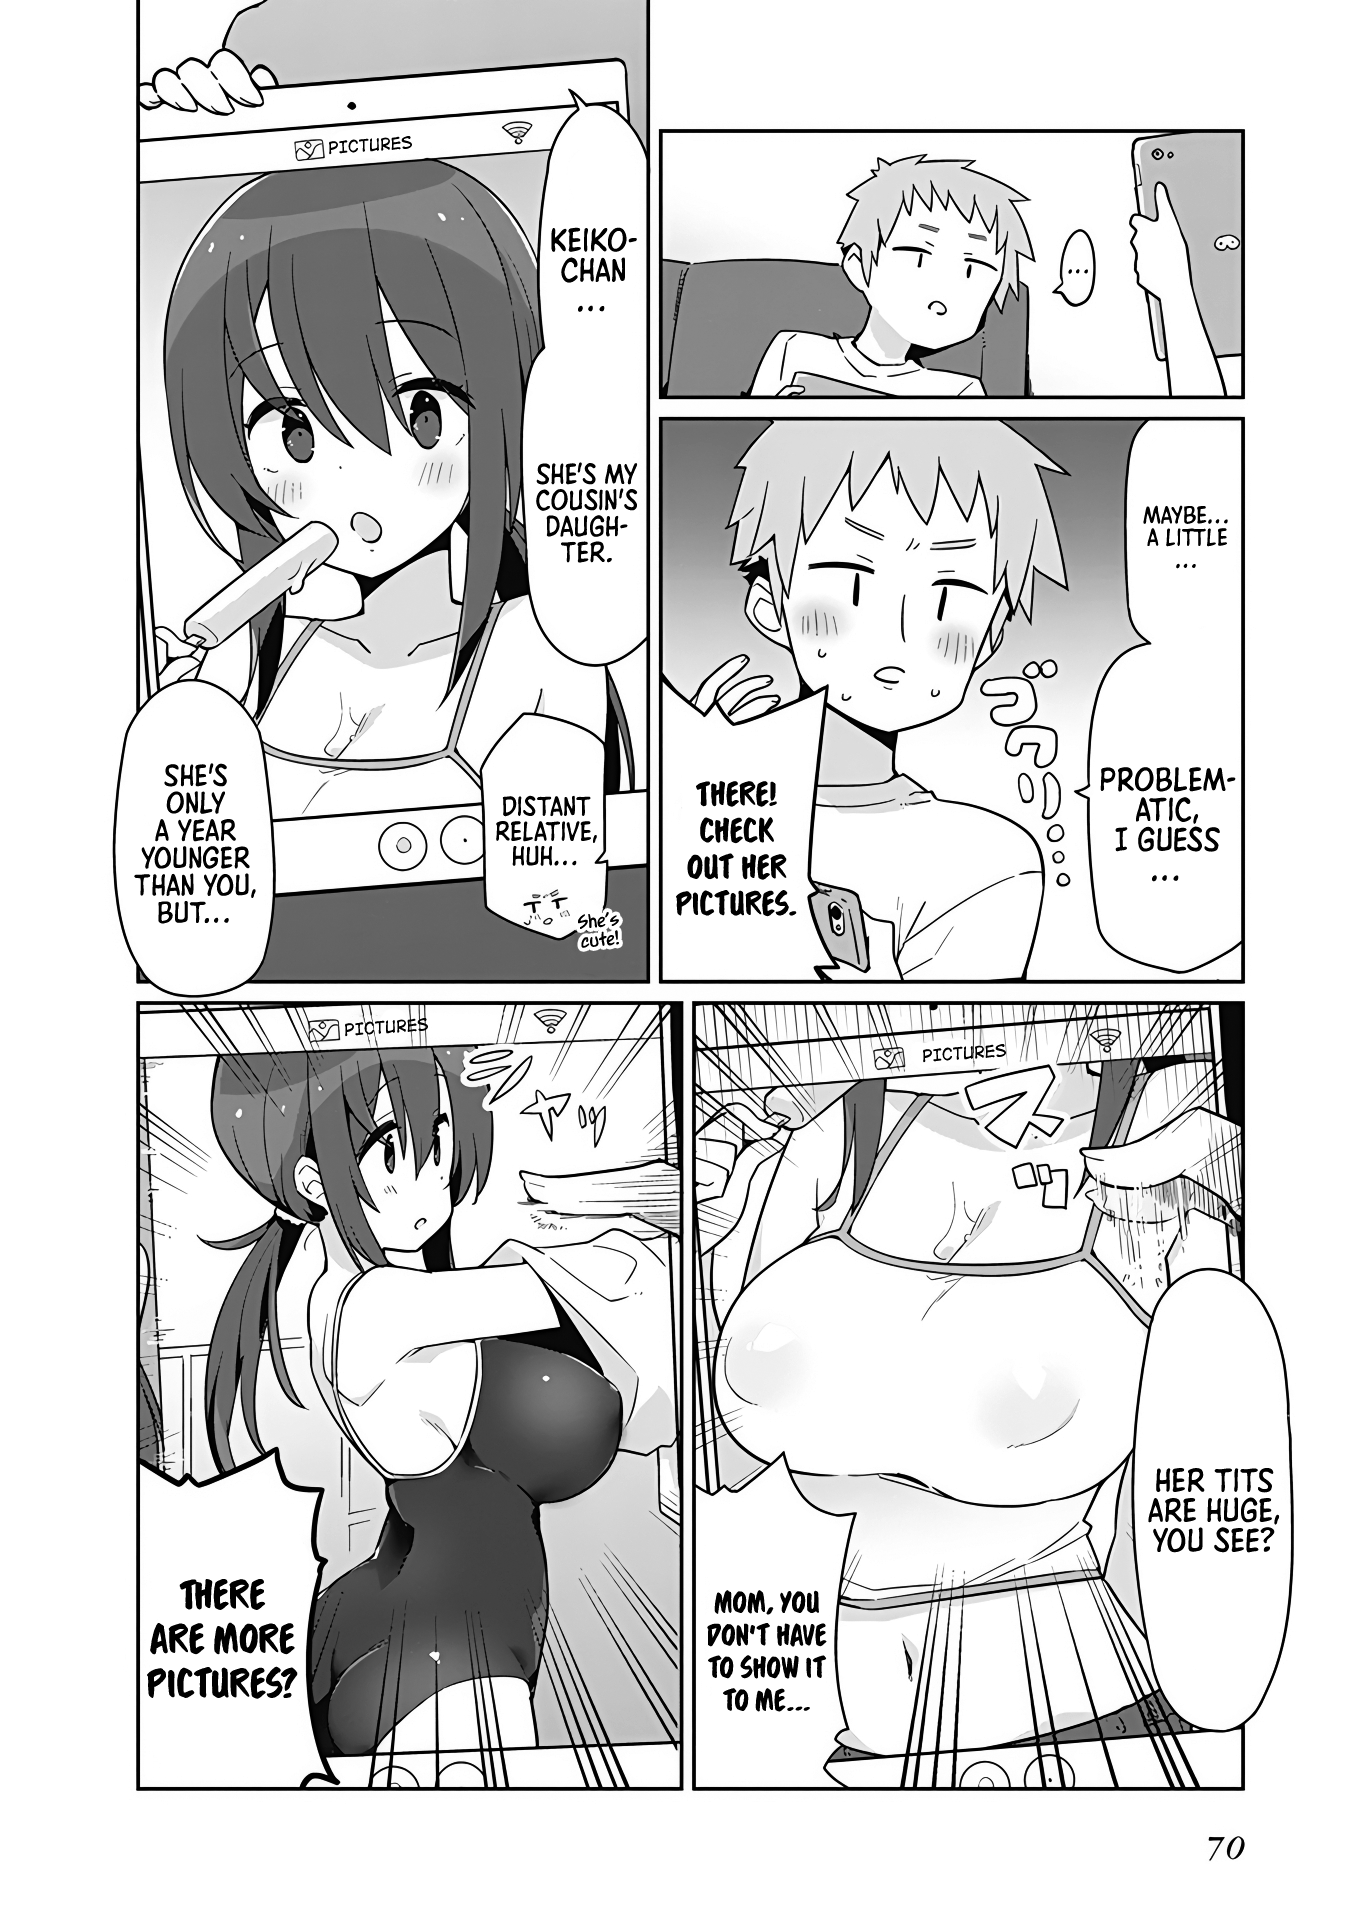 I Want To Do All Sorts Of Things With Those Plump Melons! Chapter 4: Are You Okay With Such Huge Tits? - Stroma - Picture 3